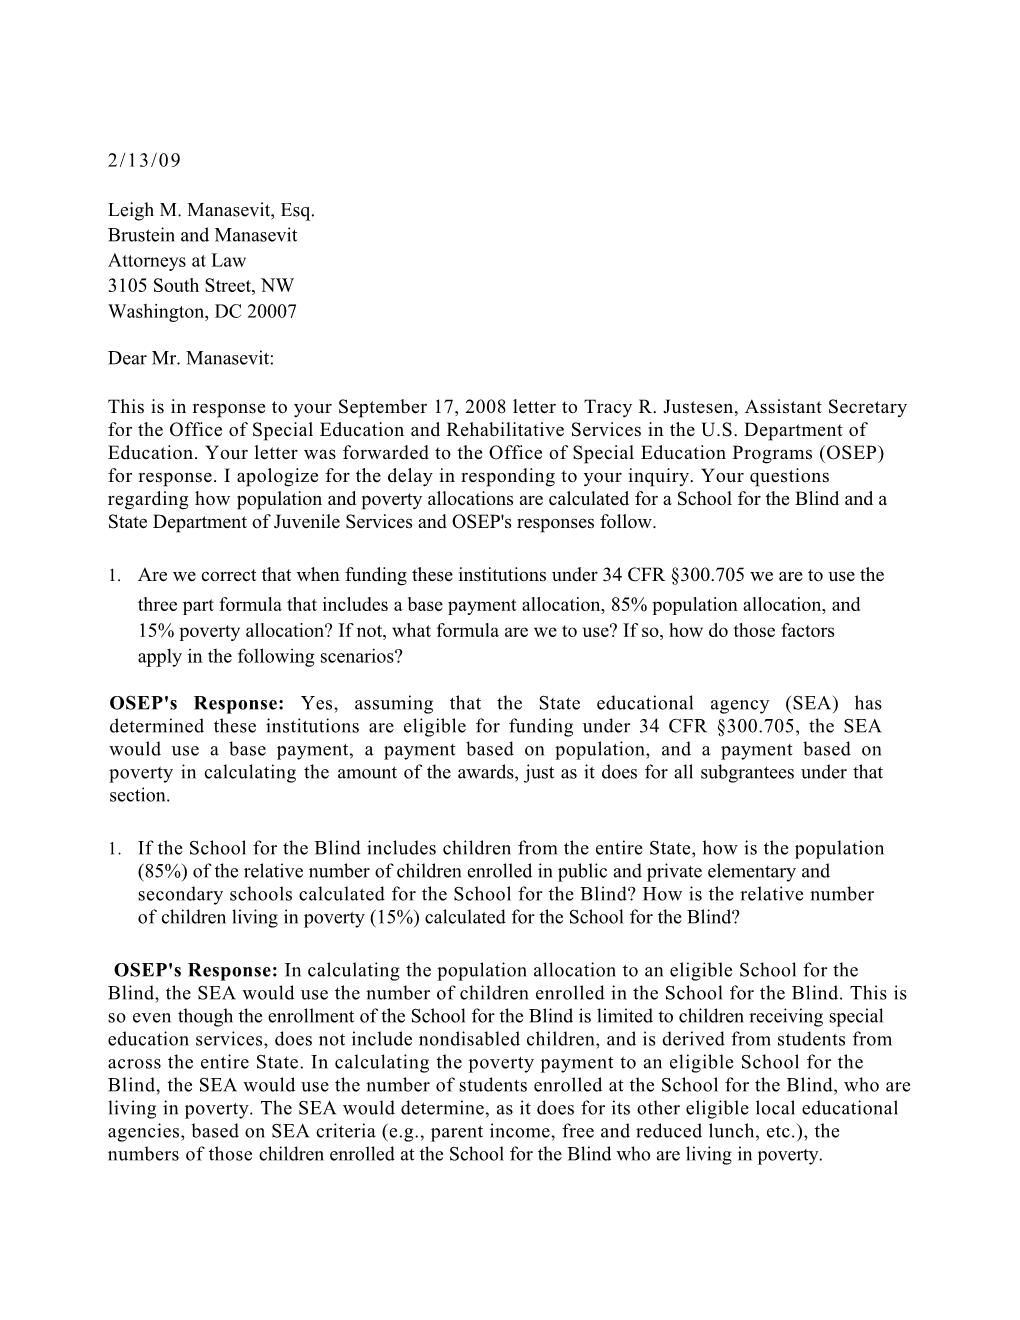 Manasevit Letter Dated 2/13/09 Re: Subgrants to Local Educational Agencies (MS Word)